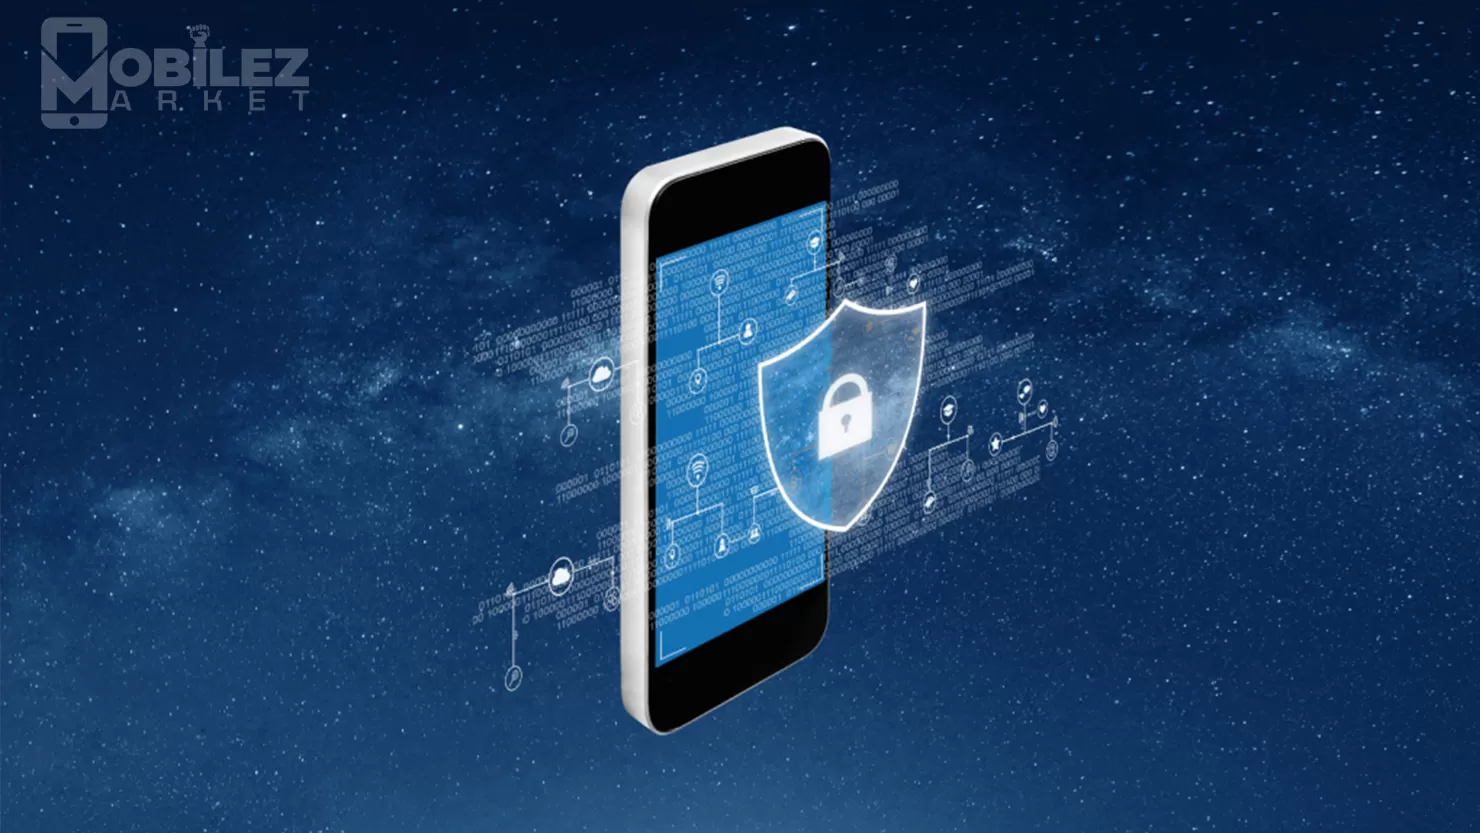 Mobile Security | Protecting Your Data and Privacy on the Go